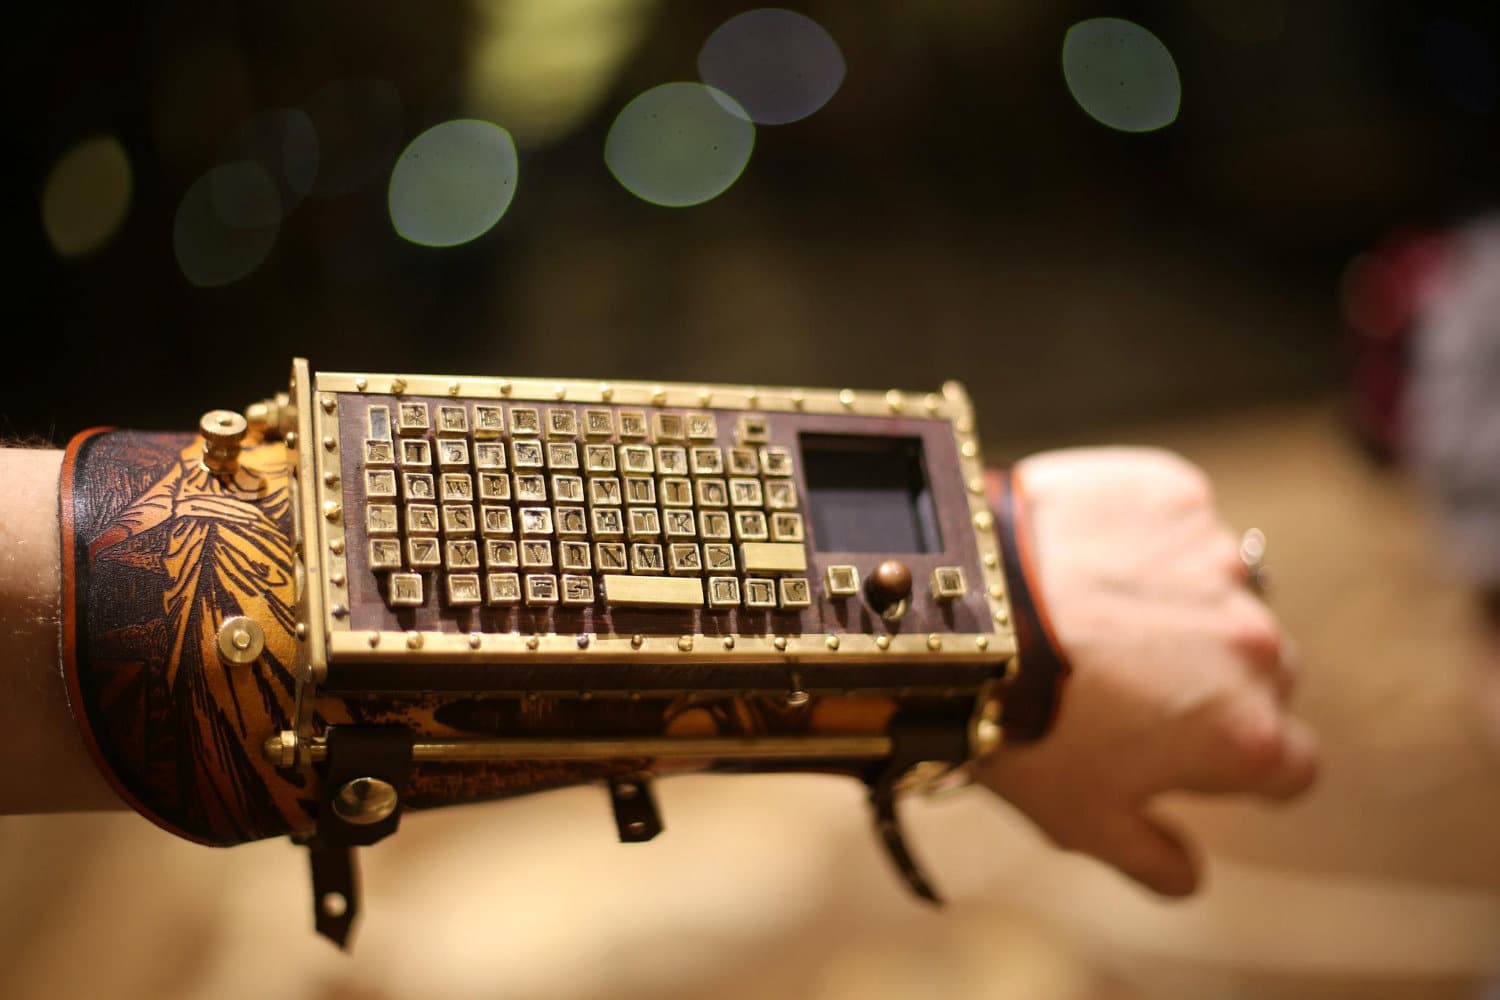 Working Bluetooth Arm Steampunk Keyboard Is Epically Cool